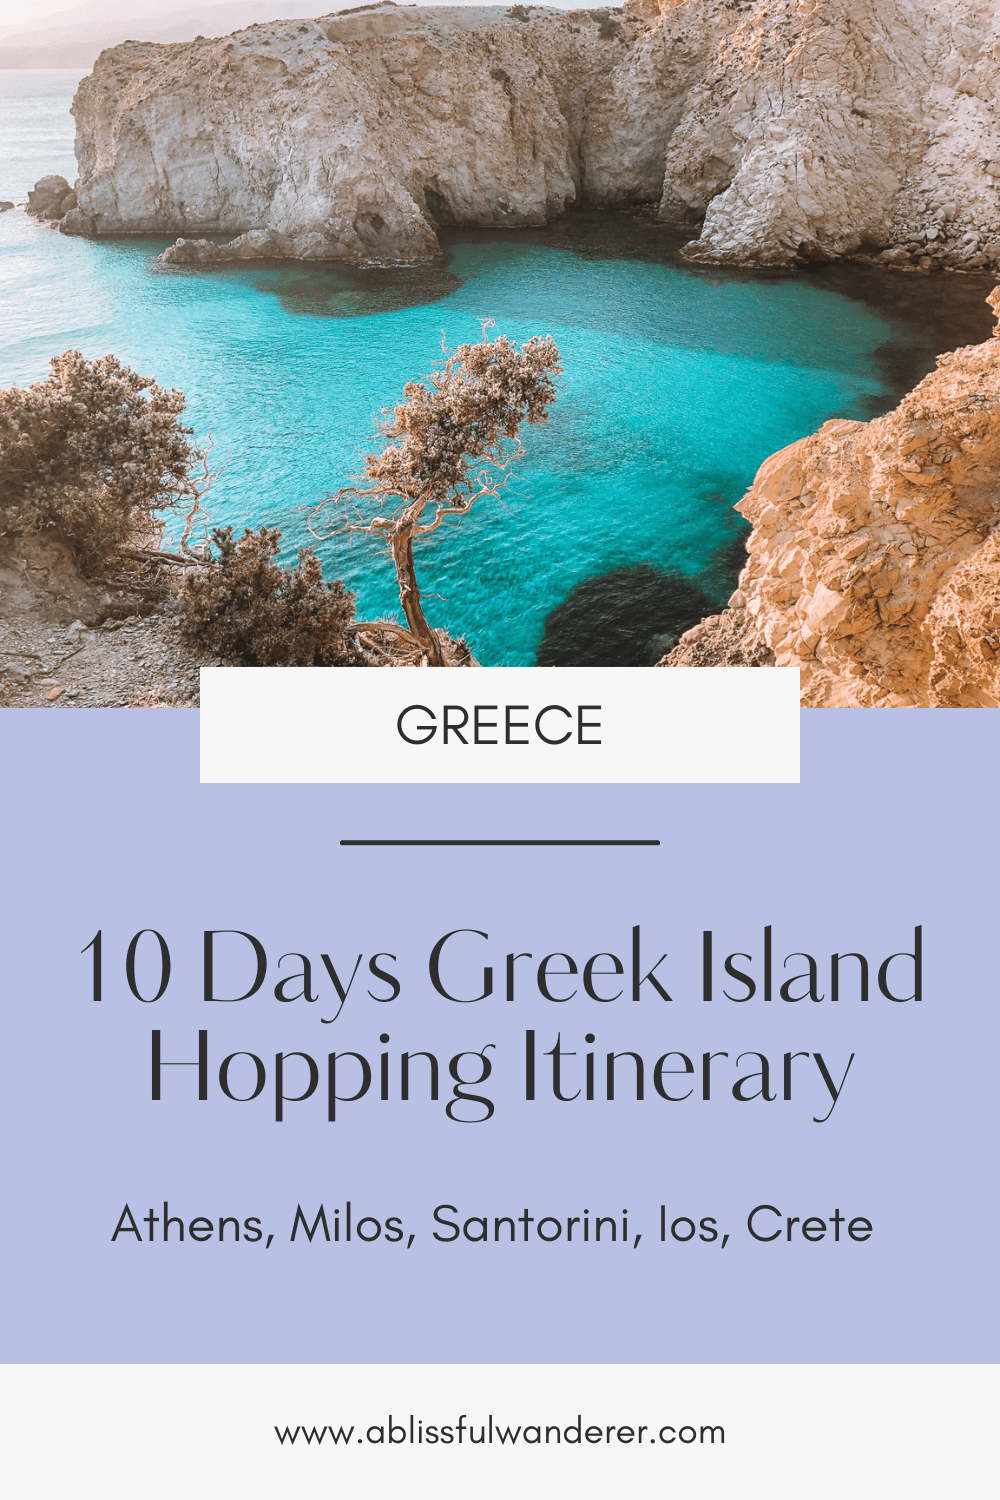 10 days in Greece Itinerary with a photo of the turquoise waters and dry cliffs in Milos, Greece pin